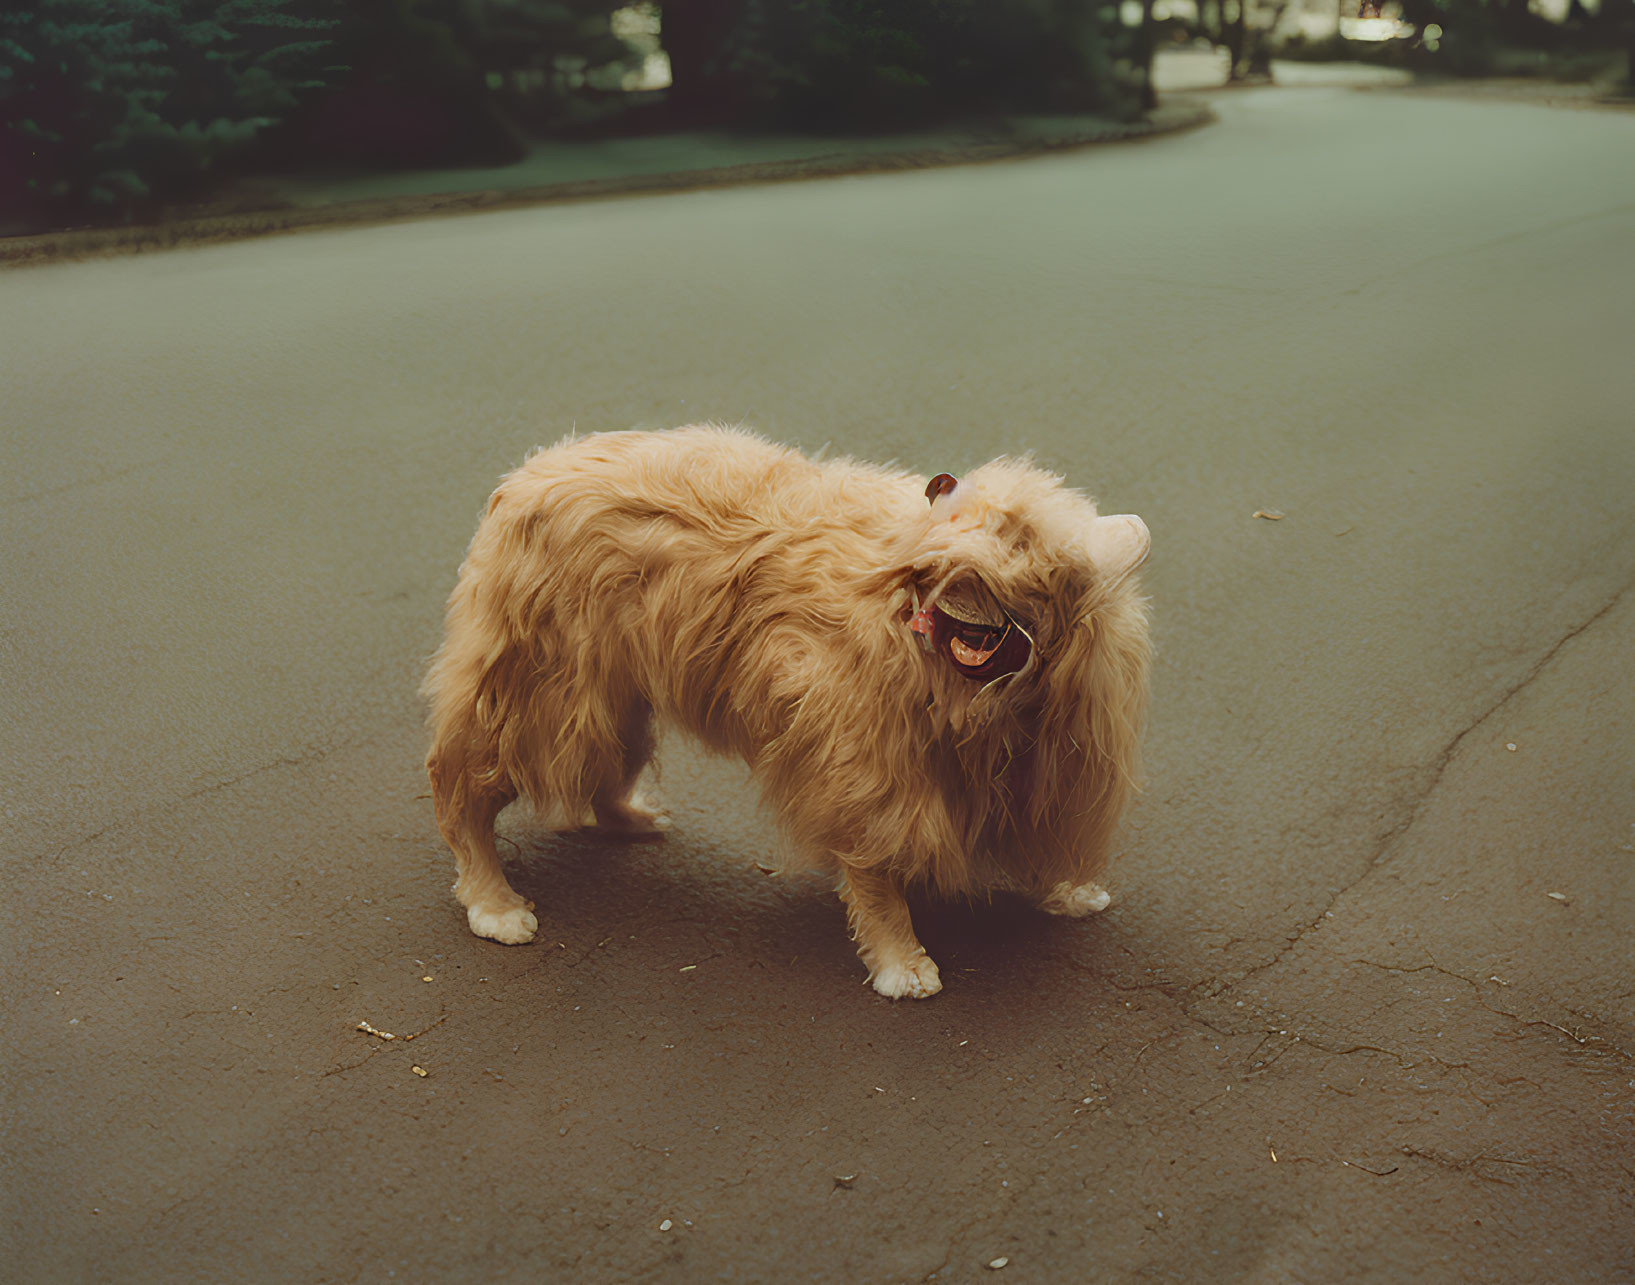 Beige fluffy dog playfully stretching on road